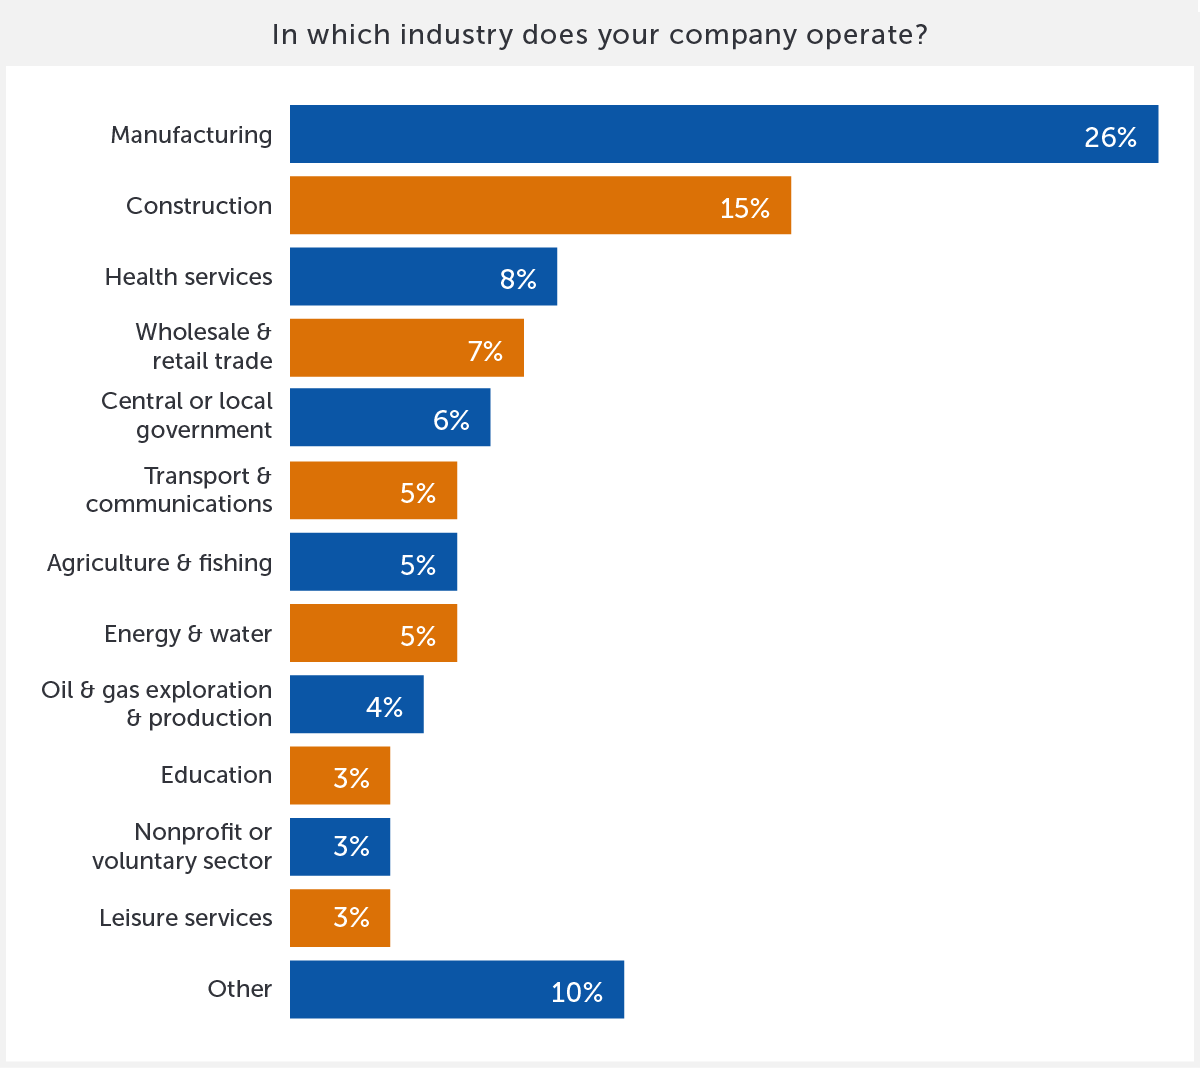 In which industry does your company operate?